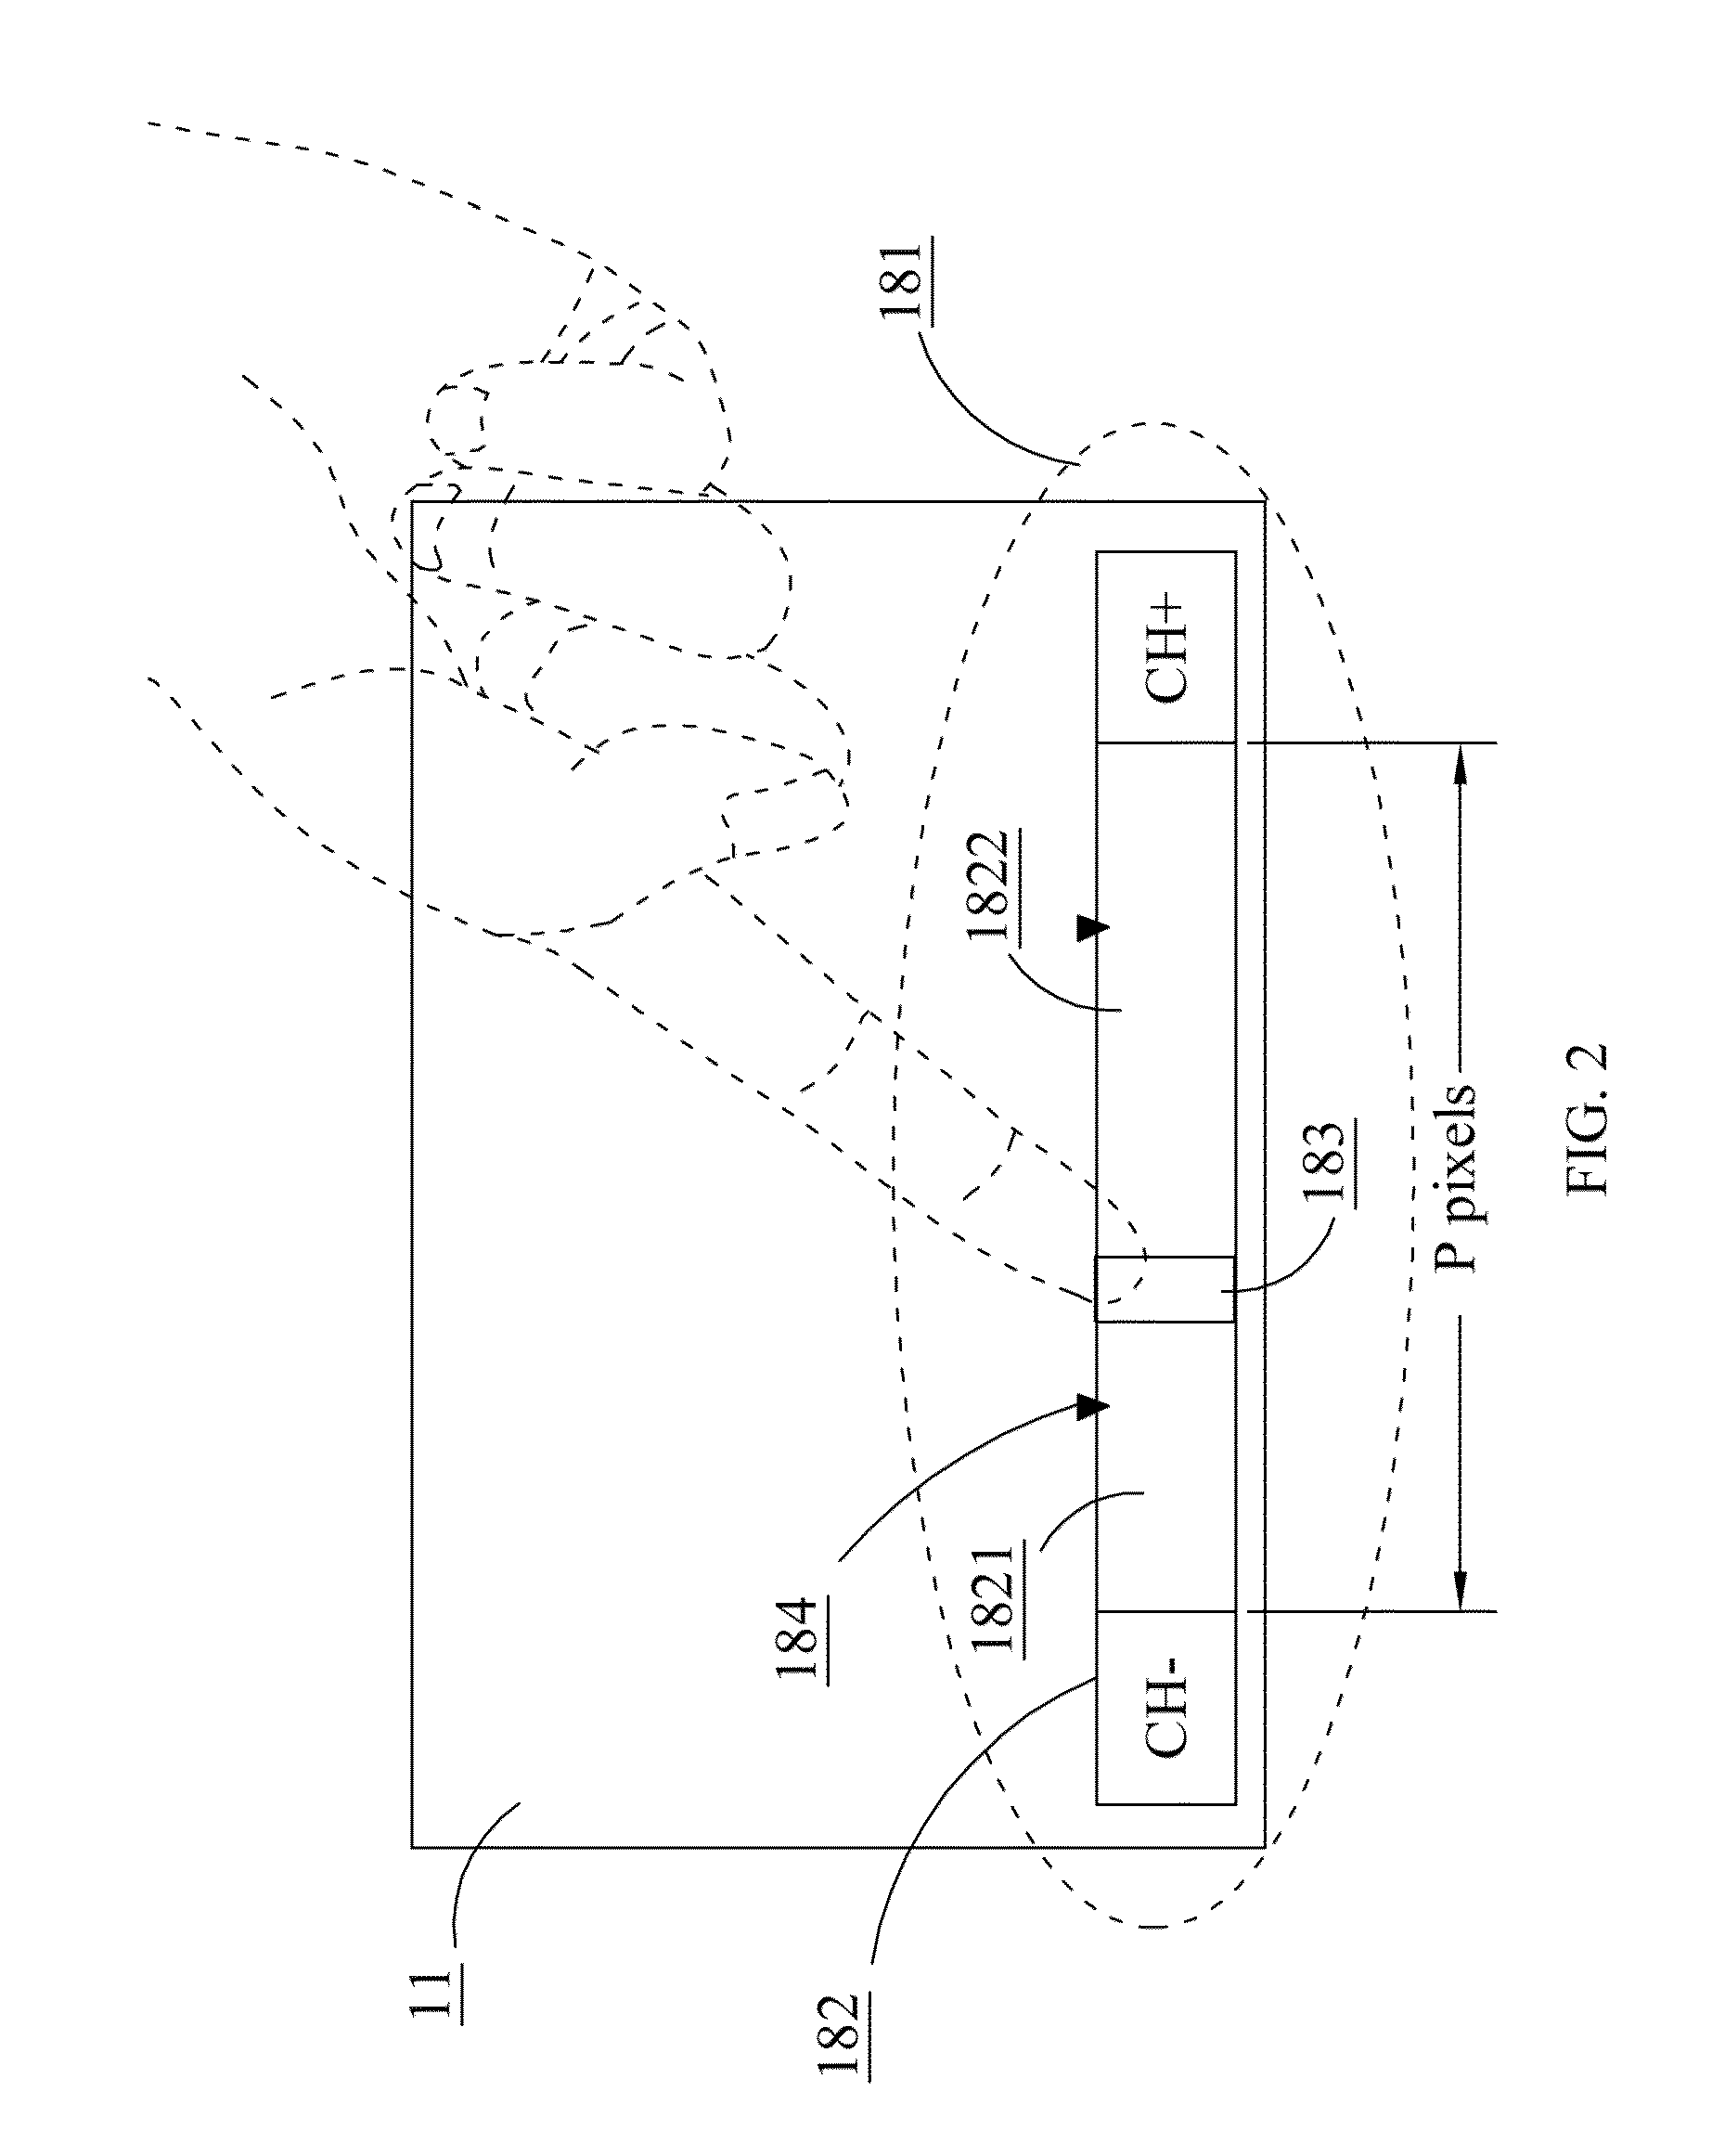 Television operation interface display system and operation method for switching television channels